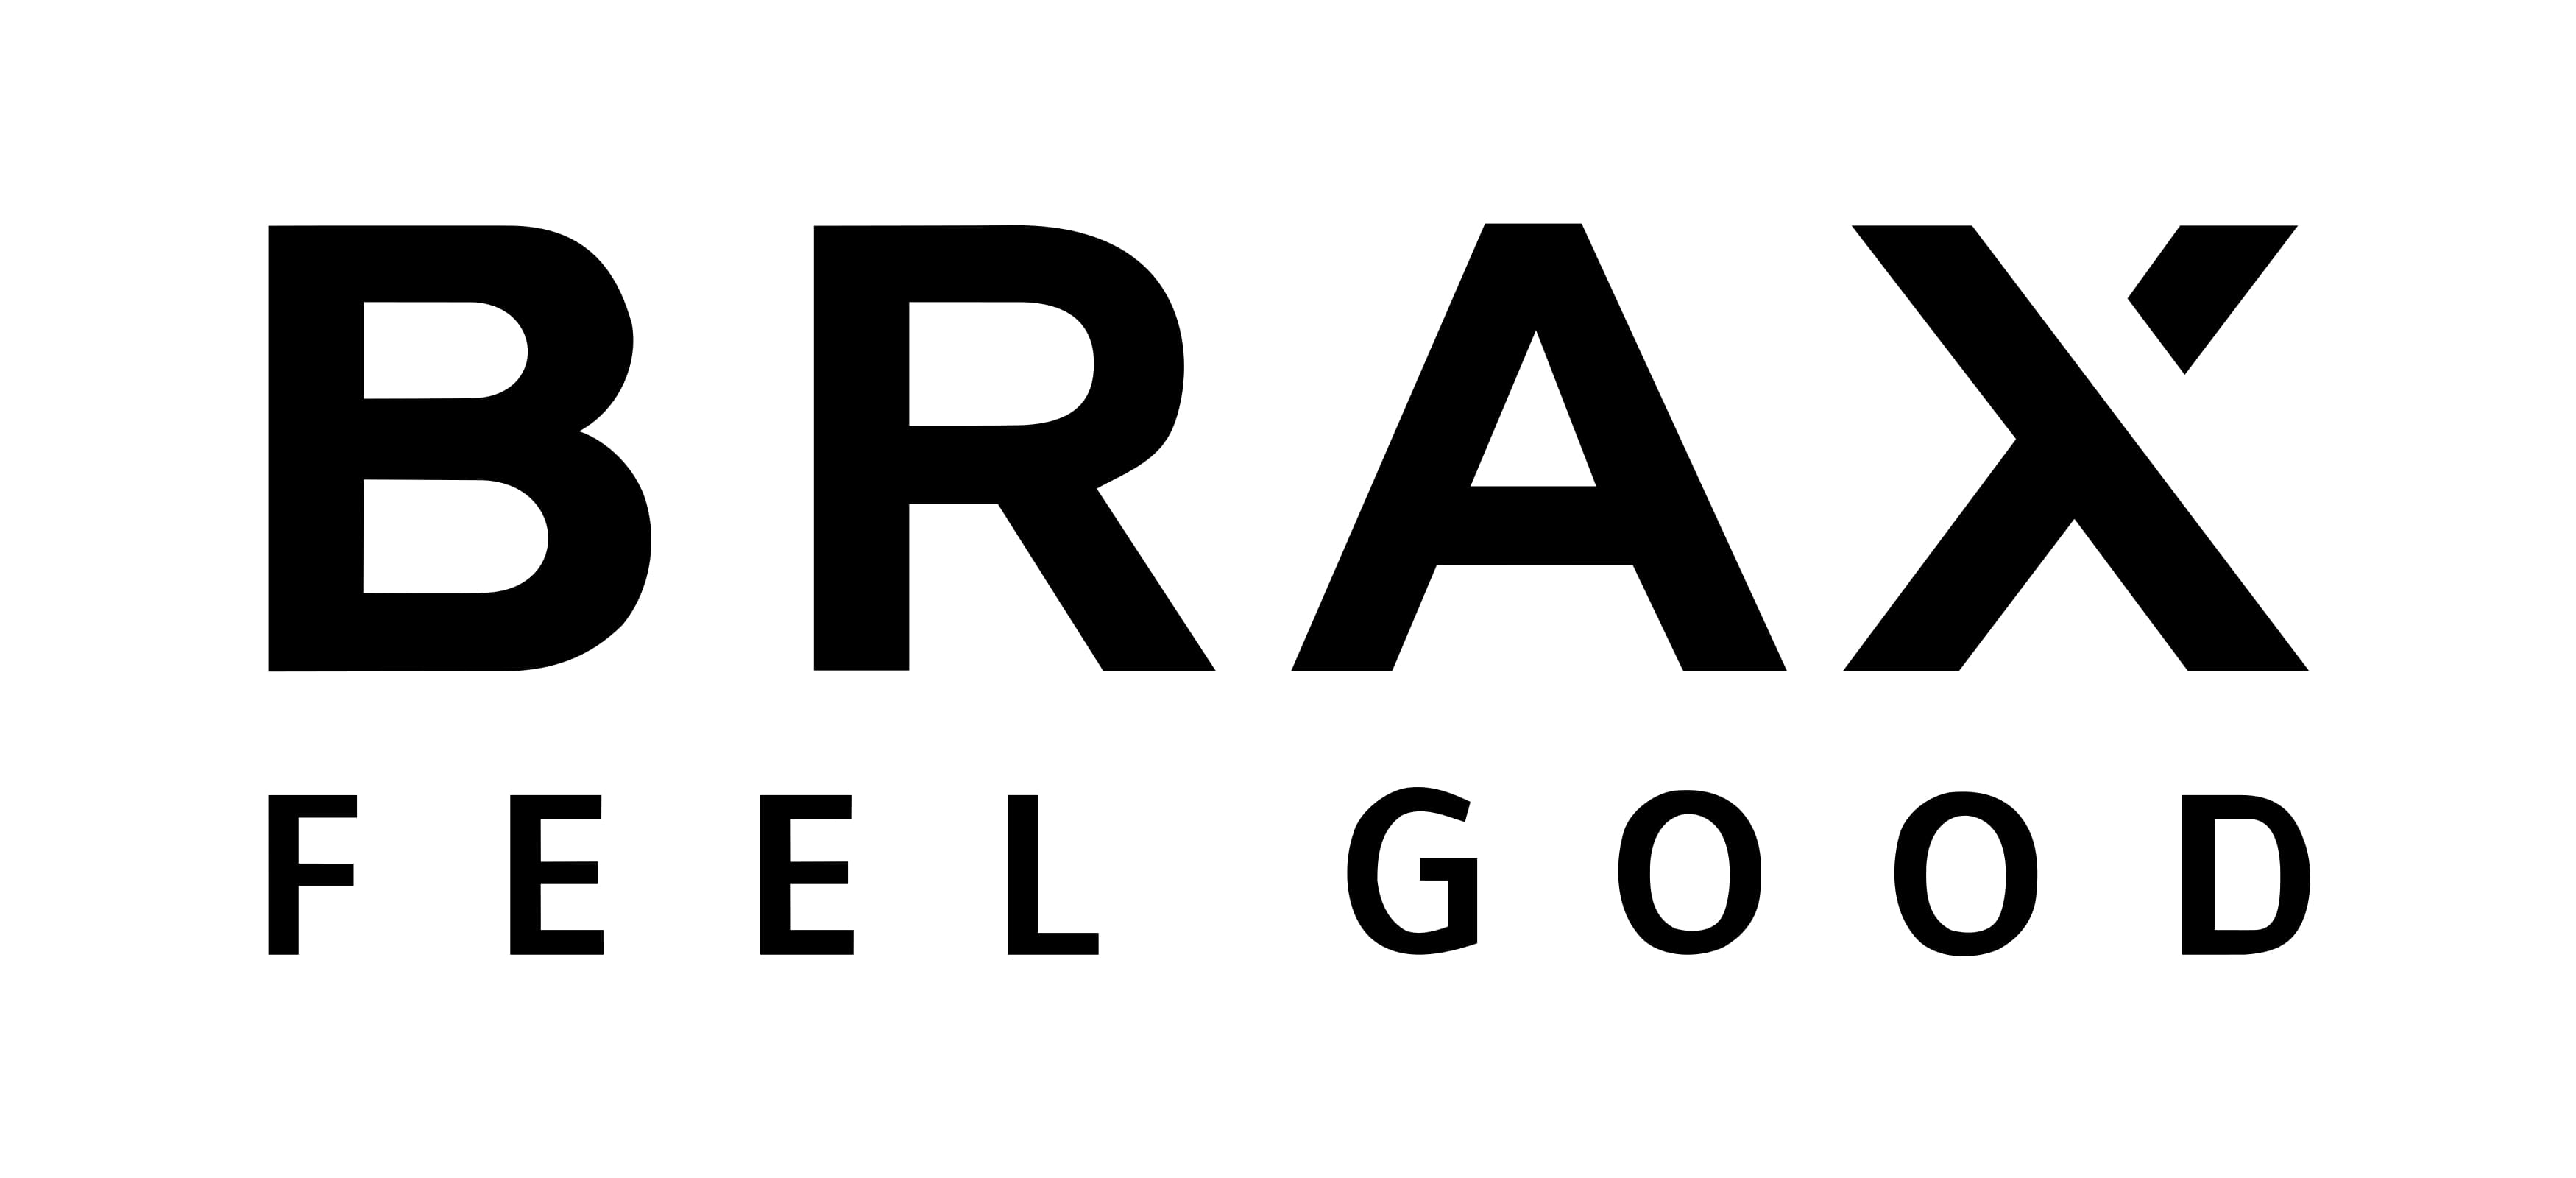 Brax logo and symbol, meaning, history, PNG